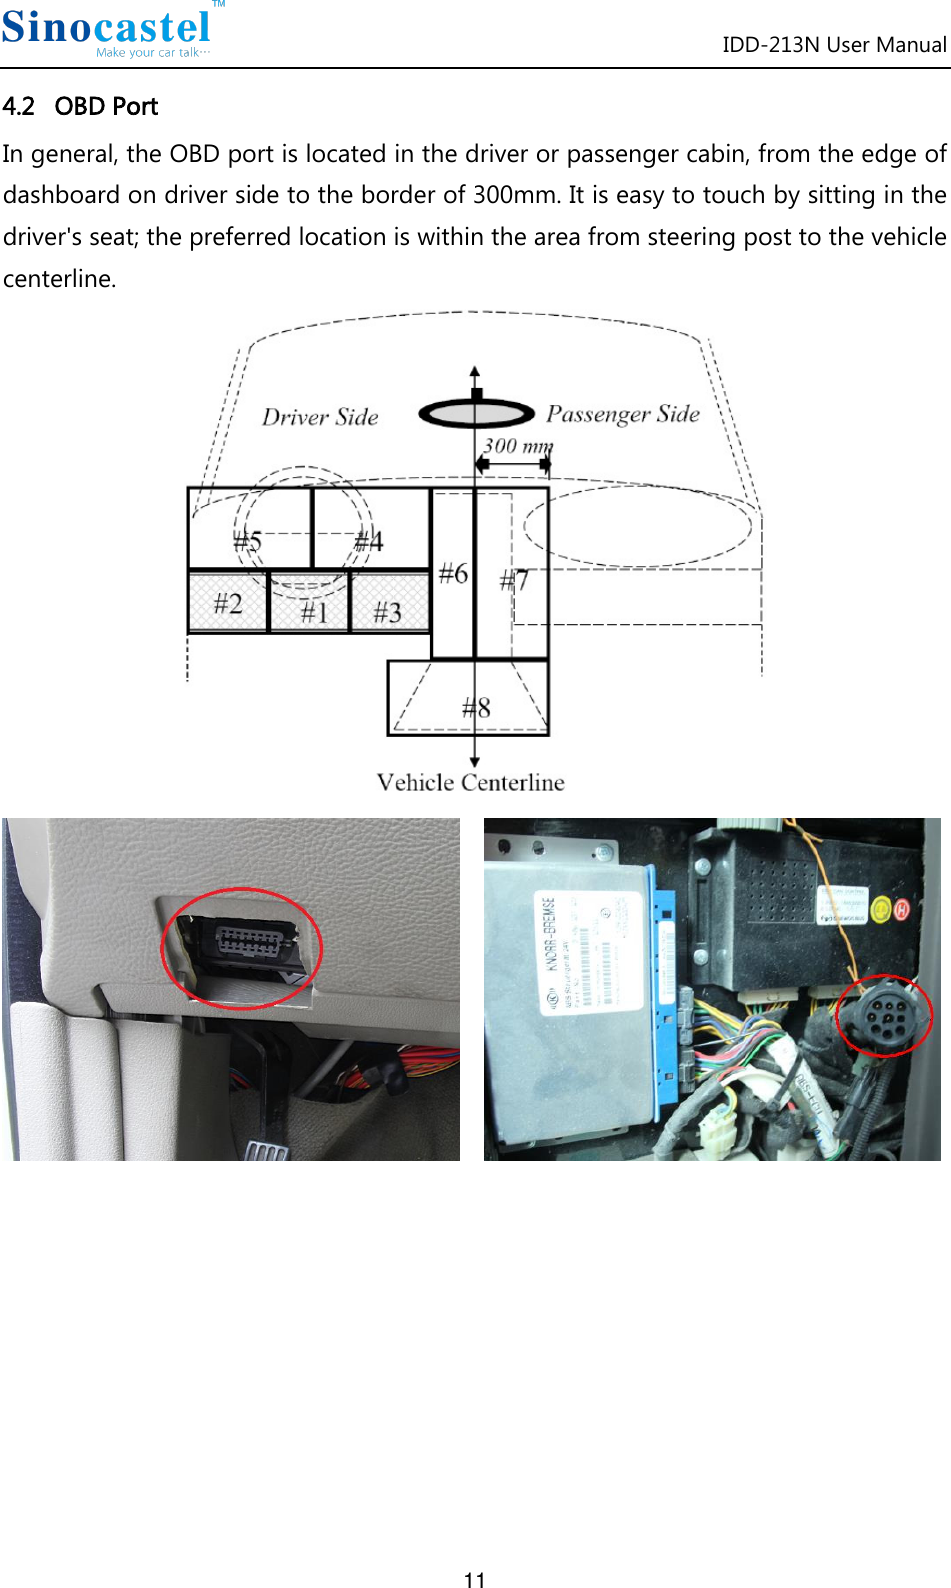 IDD-213N User Manual 11 4.2   OBD Port In general, the OBD port is located in the driver or passenger cabin, from the edge of dashboard on driver side to the border of 300mm. It is easy to touch by sitting in the driver&apos;s seat; the preferred location is within the area from steering post to the vehicle centerline.               